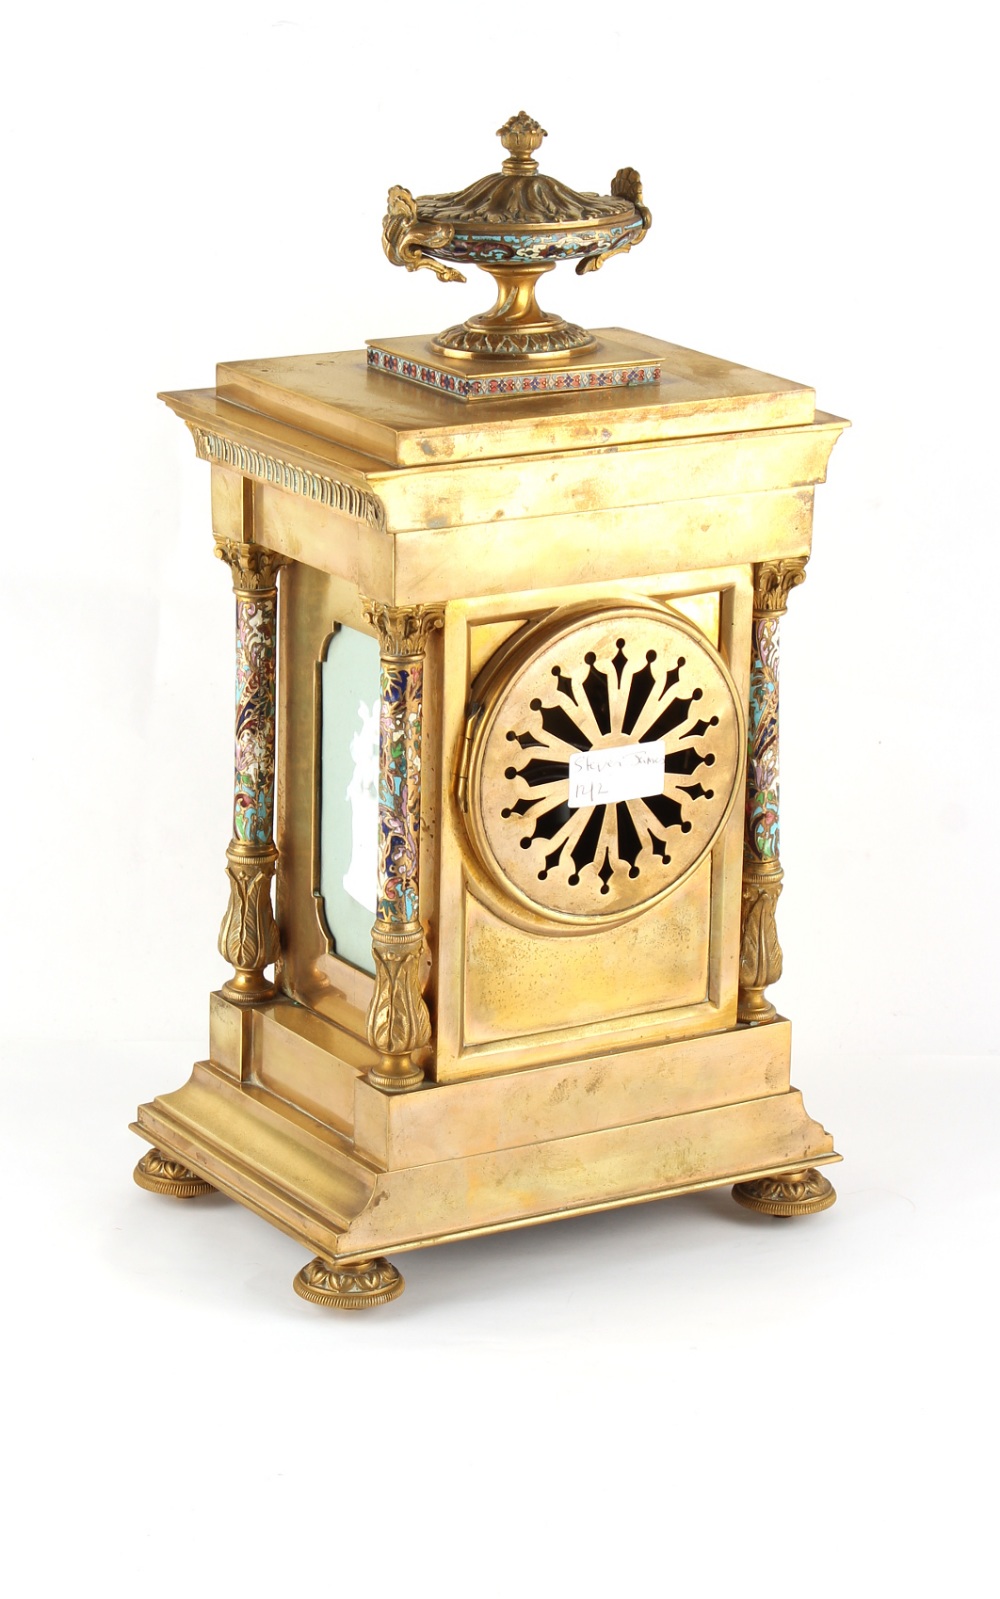 Property of a deceased estate - a late 19th century French gilt brass & cloisonne cased mantel clock - Image 2 of 2